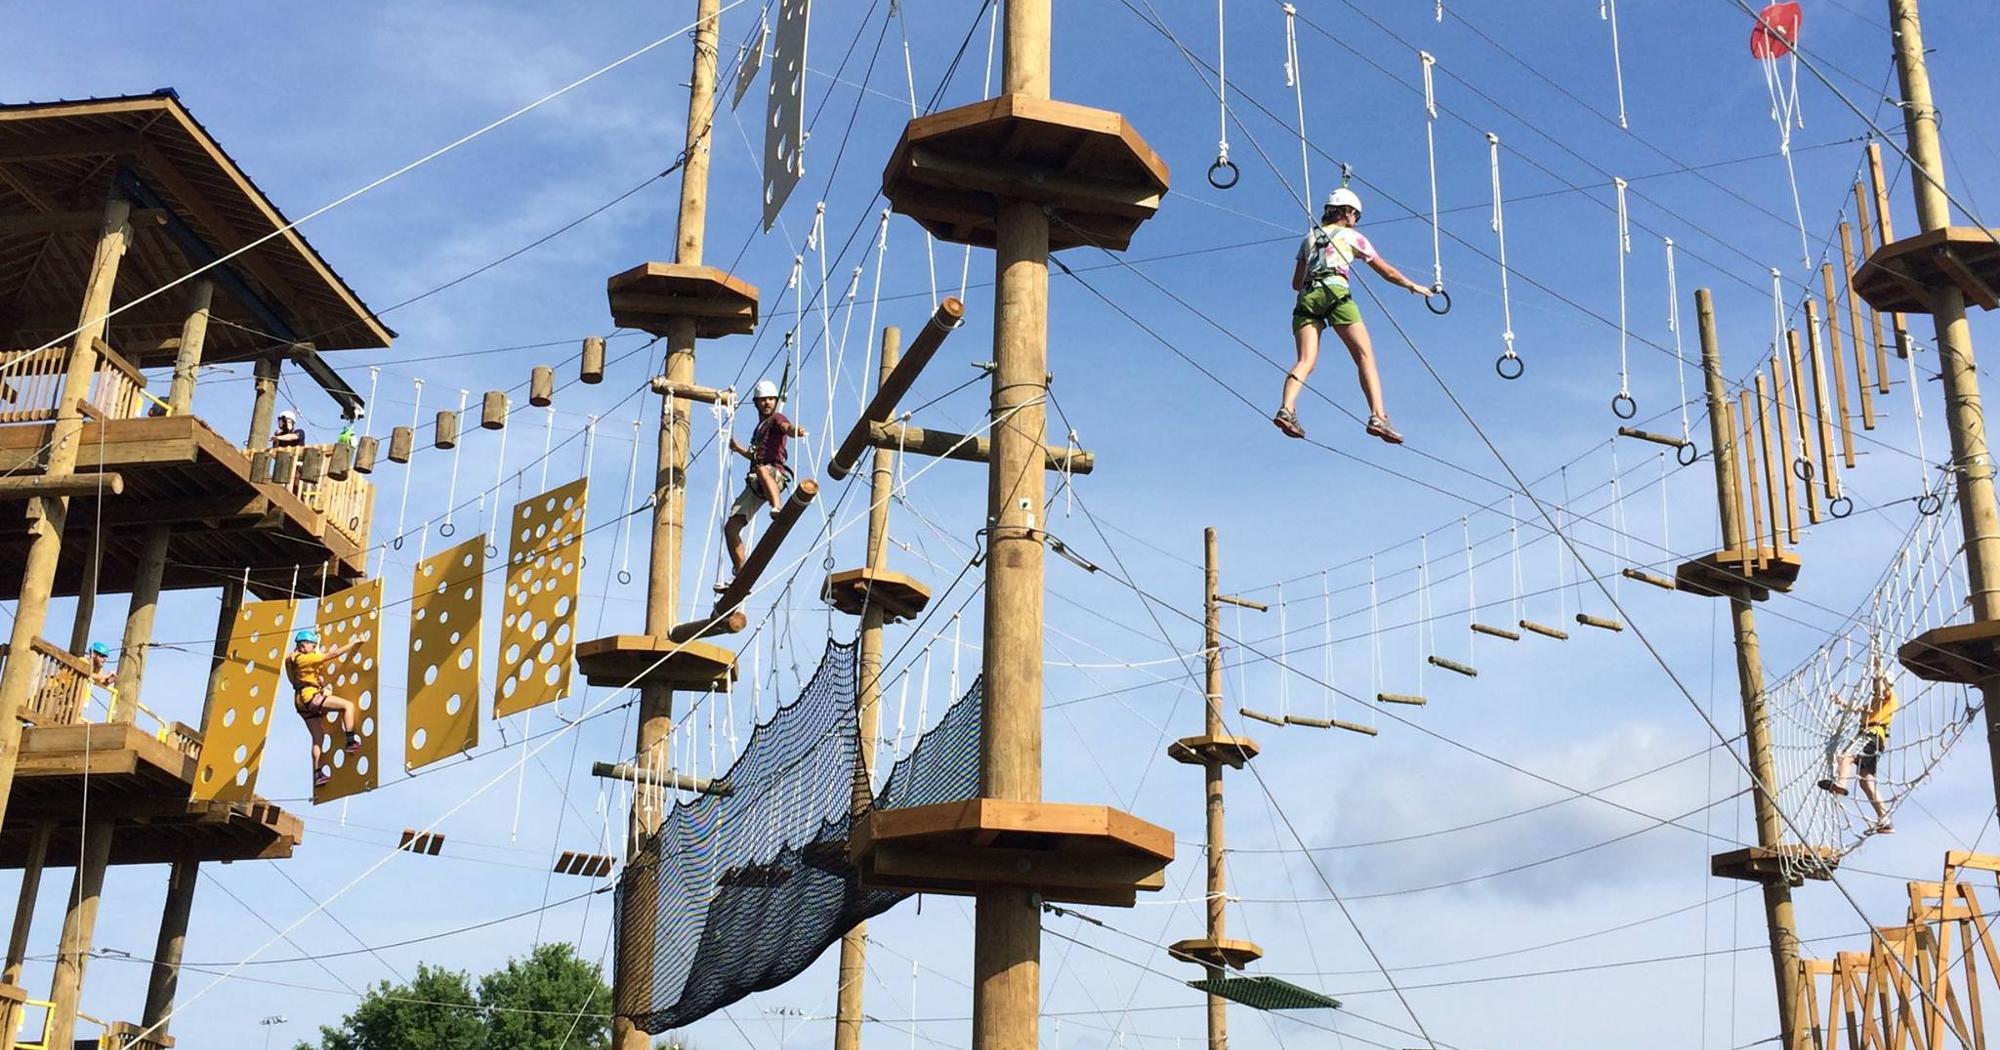 image for BASLER AERIAL ADVENTURE AND TEAM CHALLENGE COURSE